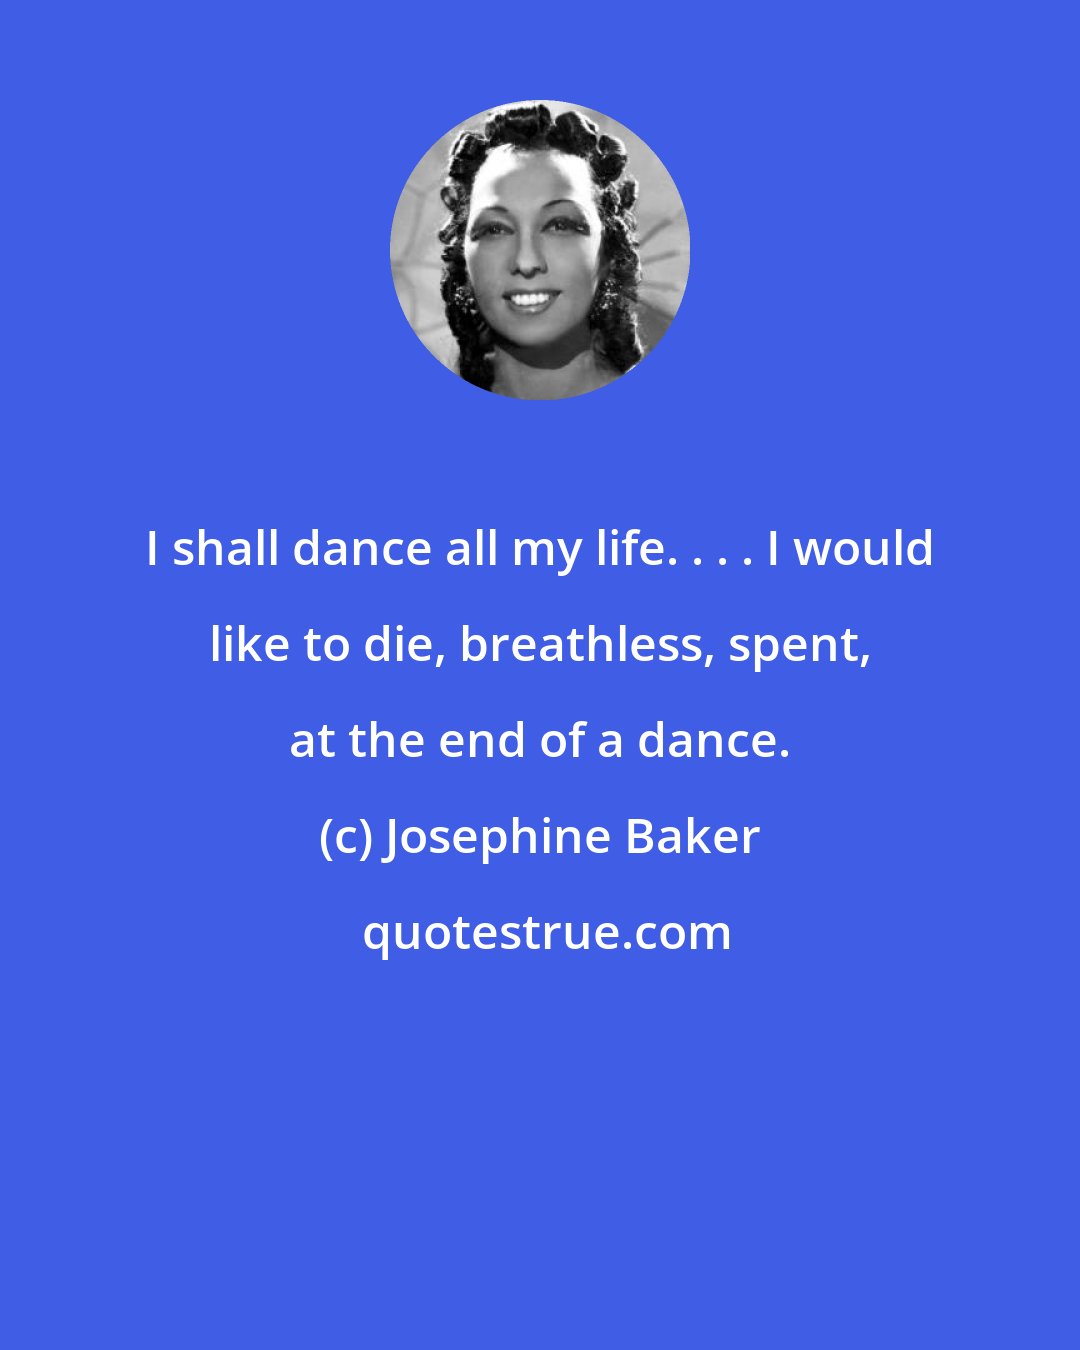 Josephine Baker: I shall dance all my life. . . . I would like to die, breathless, spent, at the end of a dance.